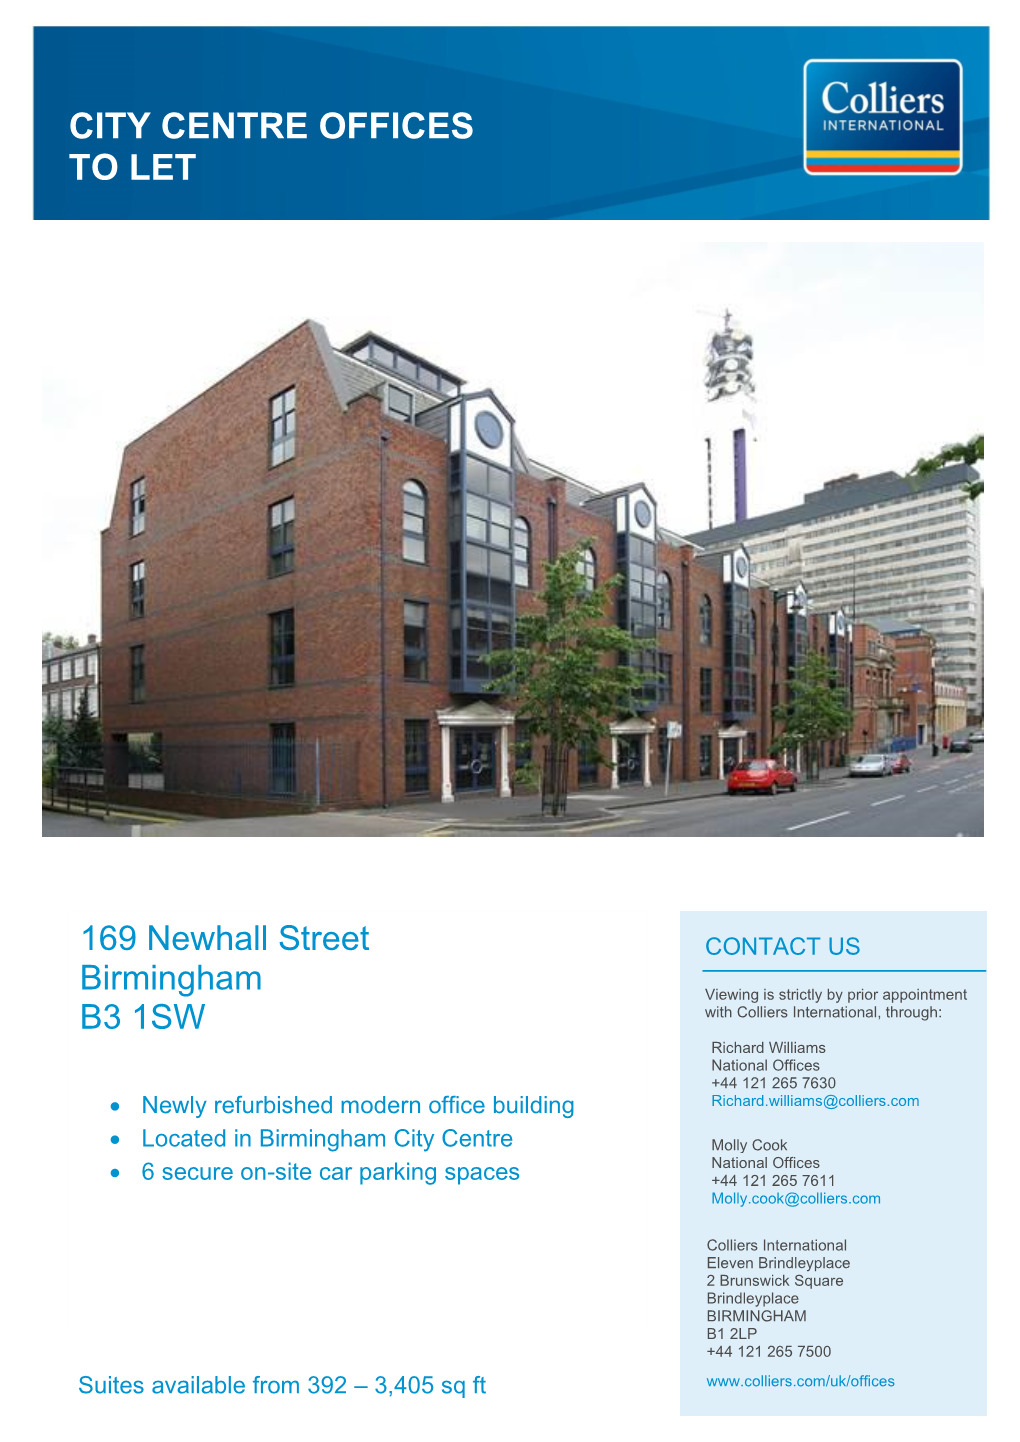 City Centre Offices to Let